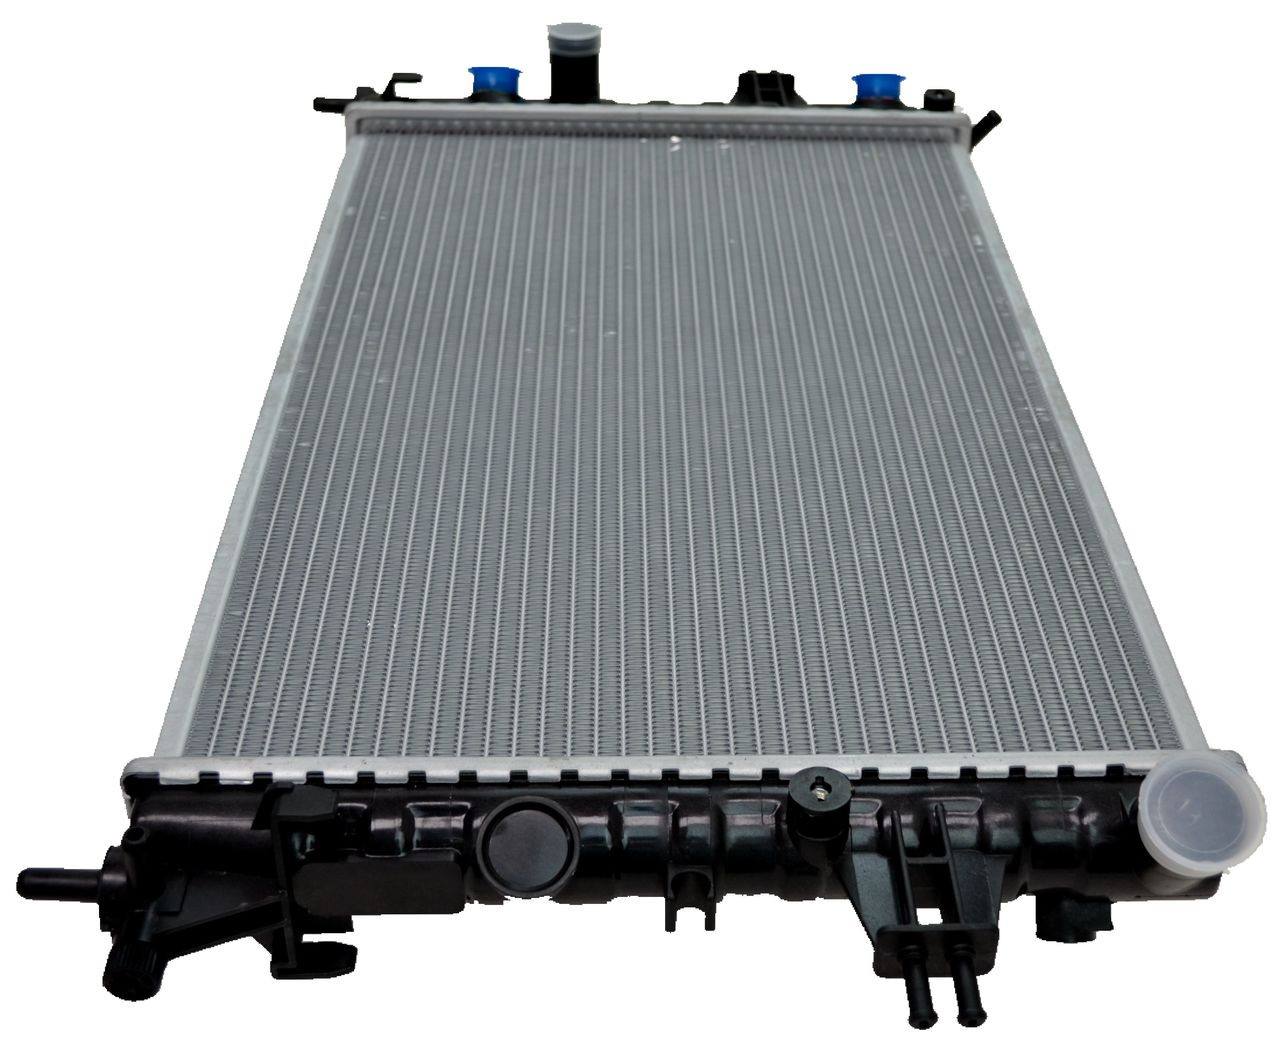 Radiator for Holden Astra TS 08/98-09/04 Auto Manual 1.8L 2.0L 98 99 00 01 02 03 04